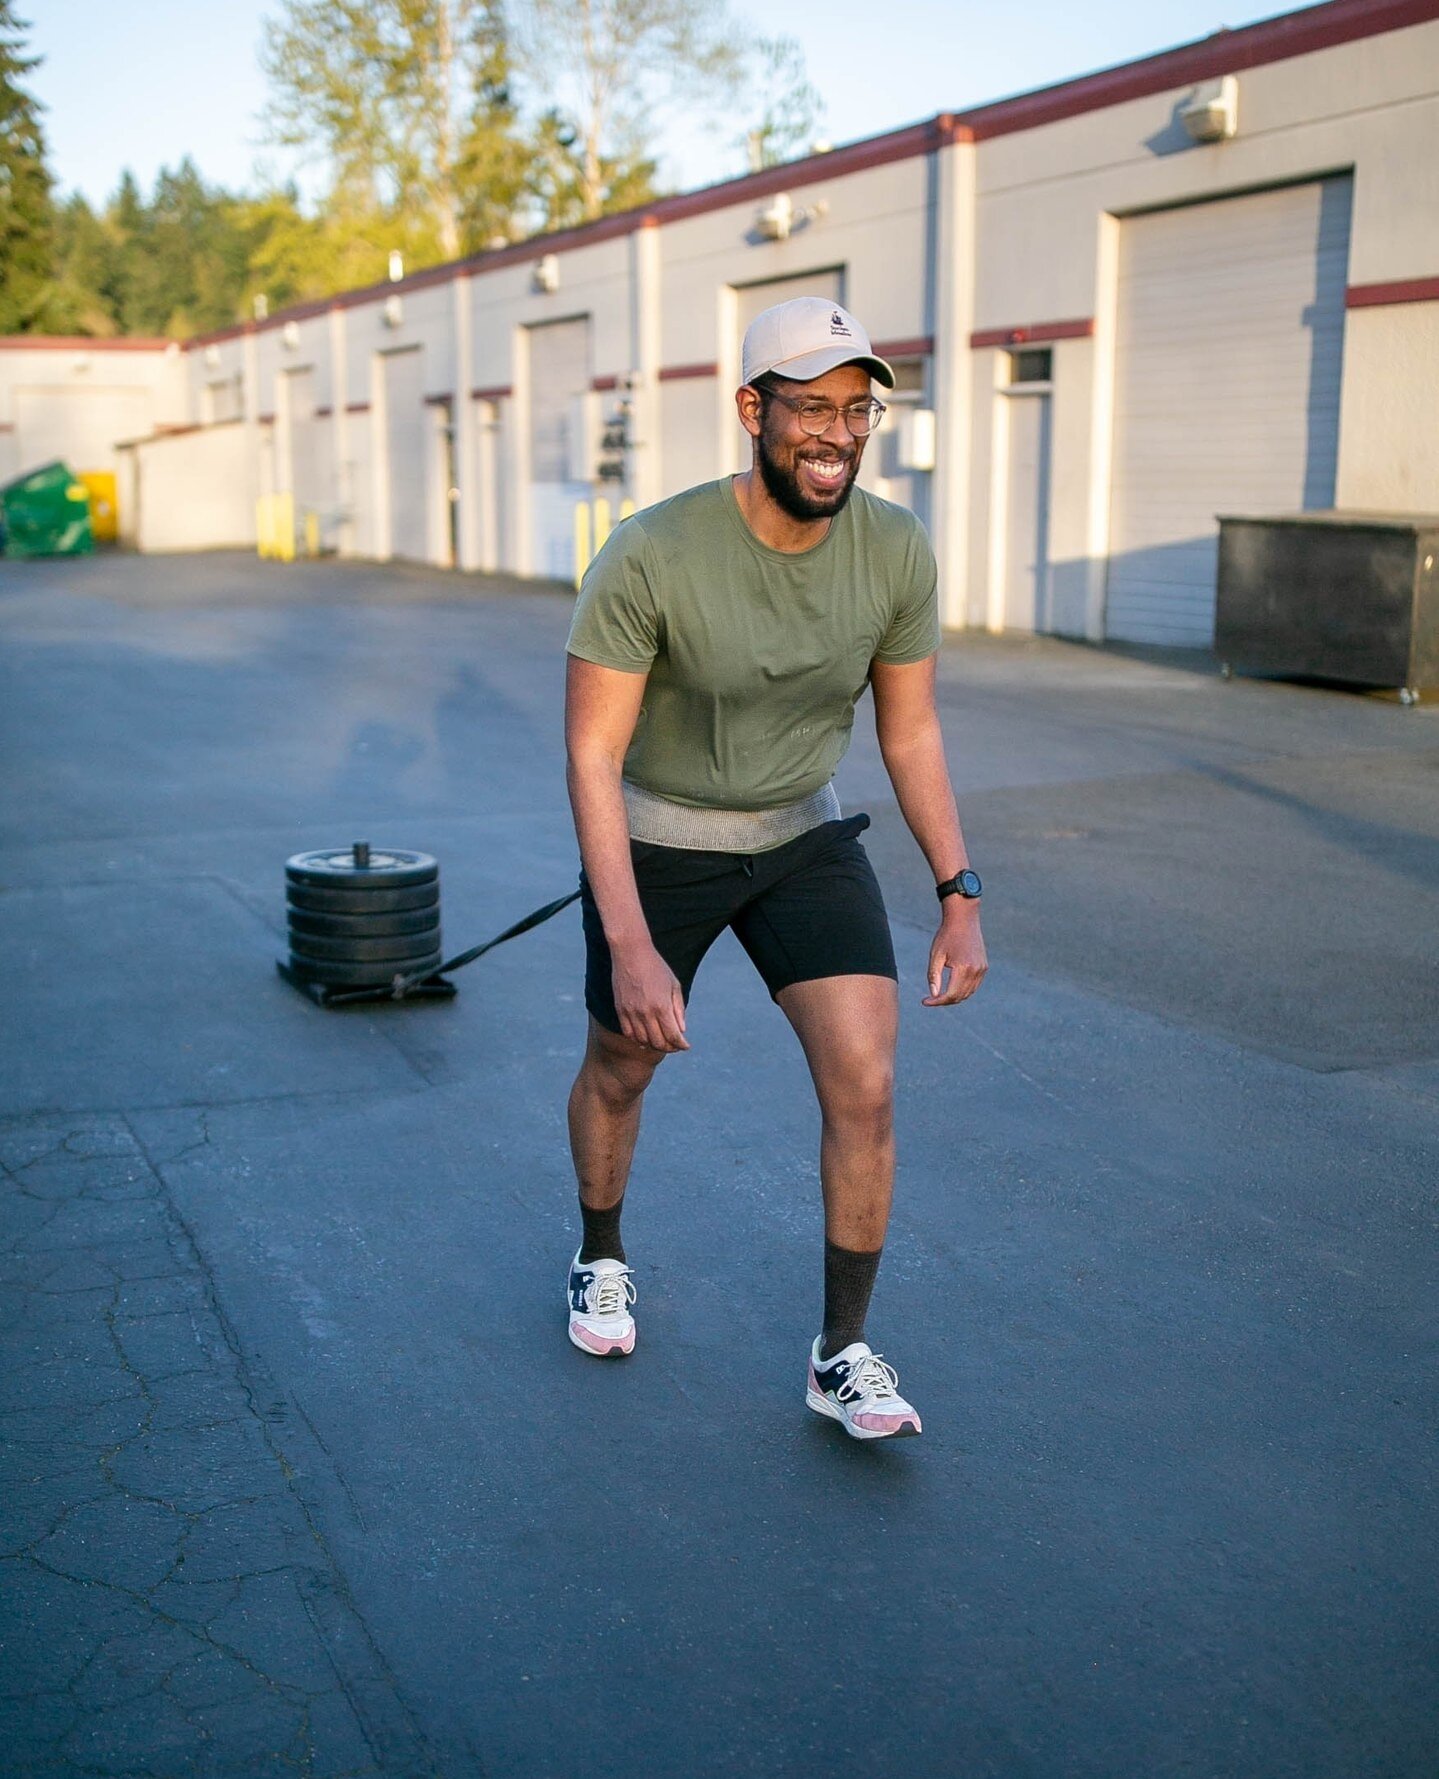 Sled work is a low-impact, high-intensity exercise that engages multiple muscle groups, making it a great addition to anyone looking to improve their overall physical fitness, recovery and capacity for high-intensity training stimulus. Sled work also